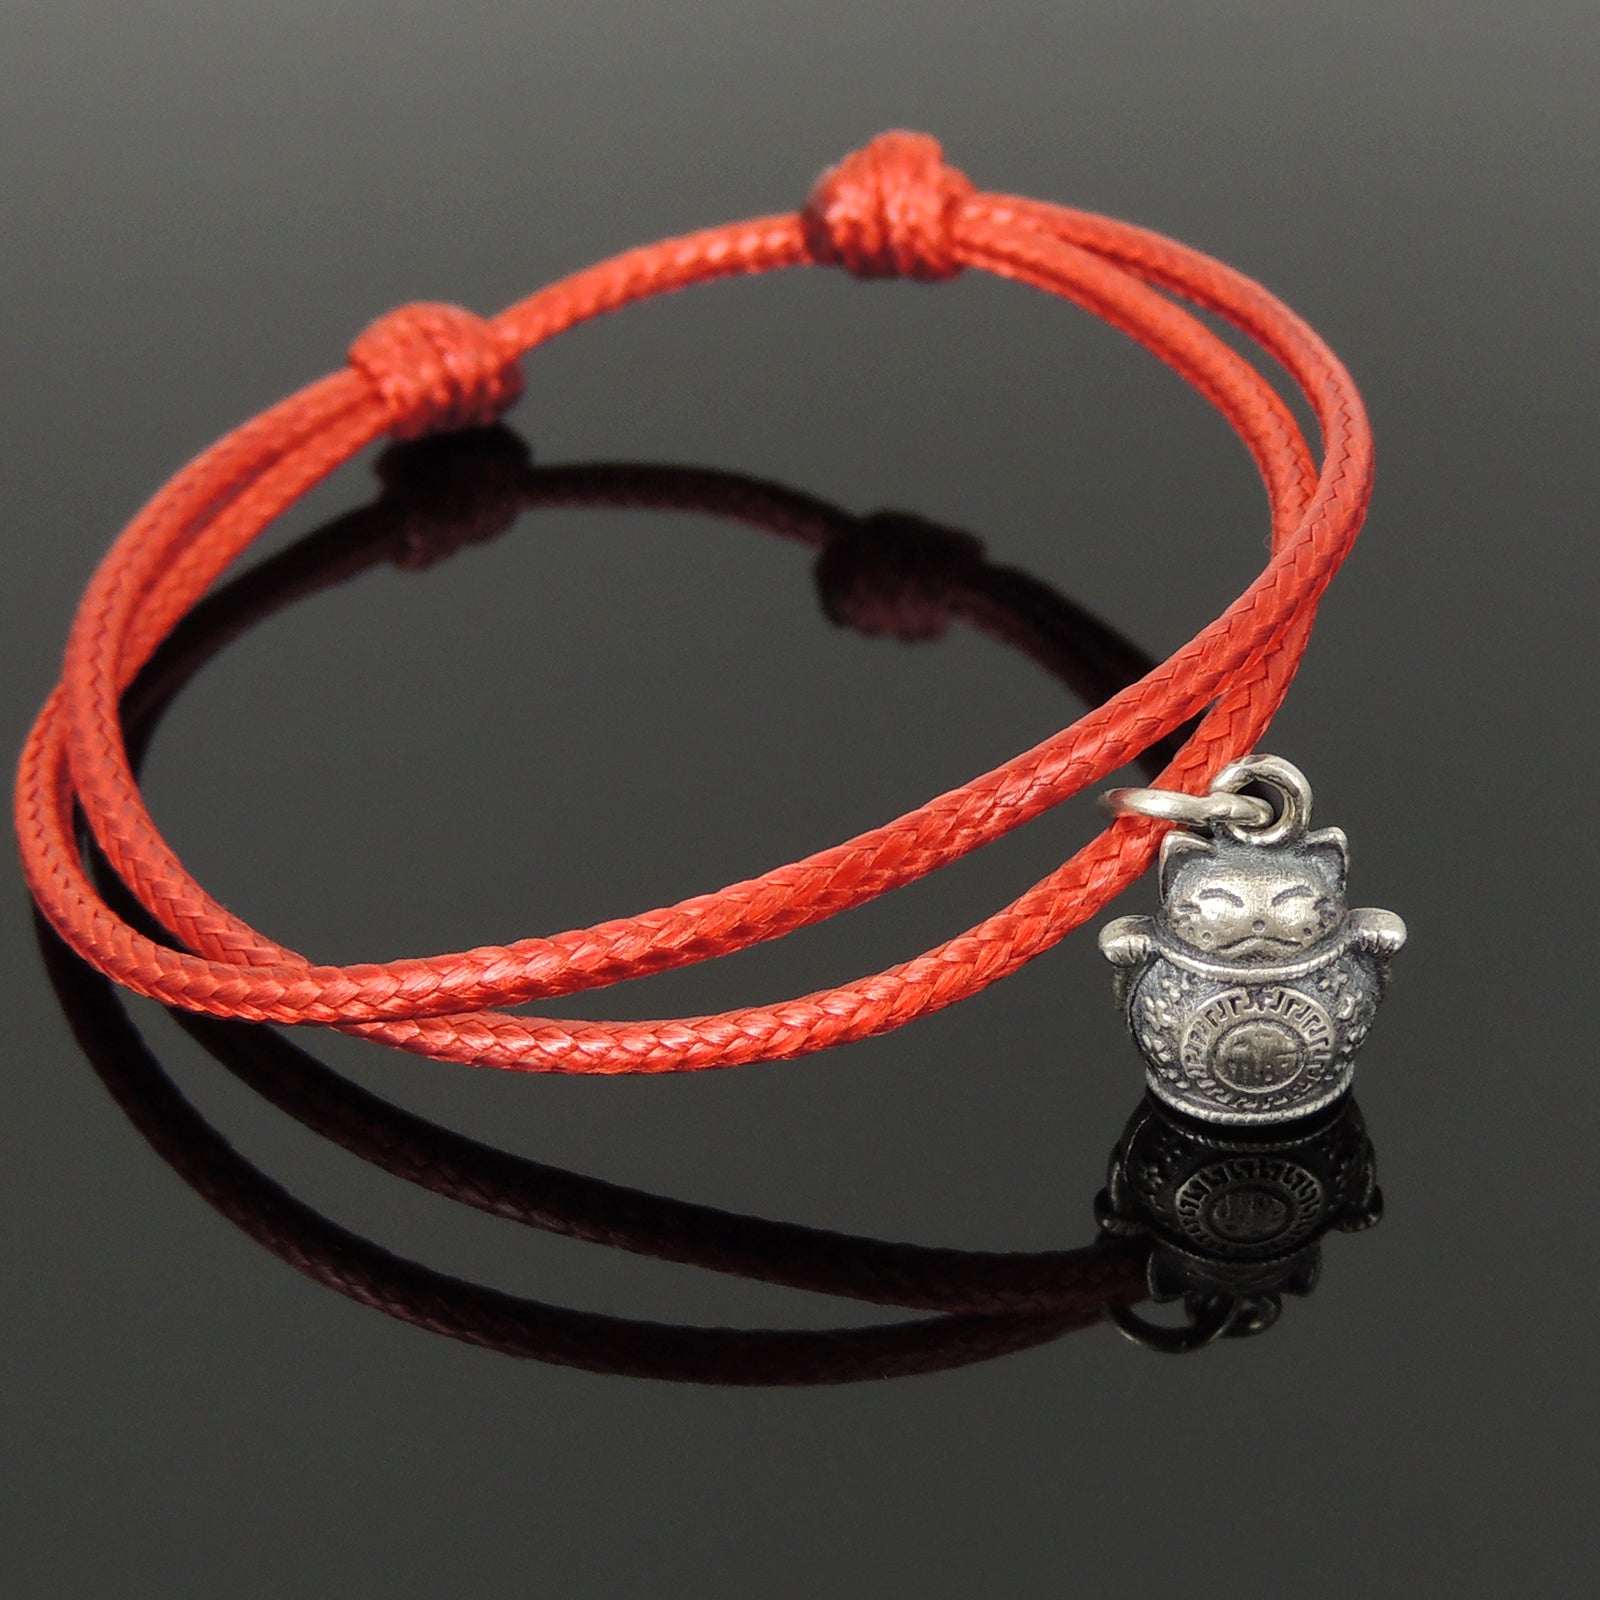 Red Wax Rope Bracelet | Maneki Neko Charm | Double-sided Lucky Cat with Chinese Calligraphy Symbols | "Blessing" & "Attraction of Wealth" | Unplated Genuine 925 Sterling Silver